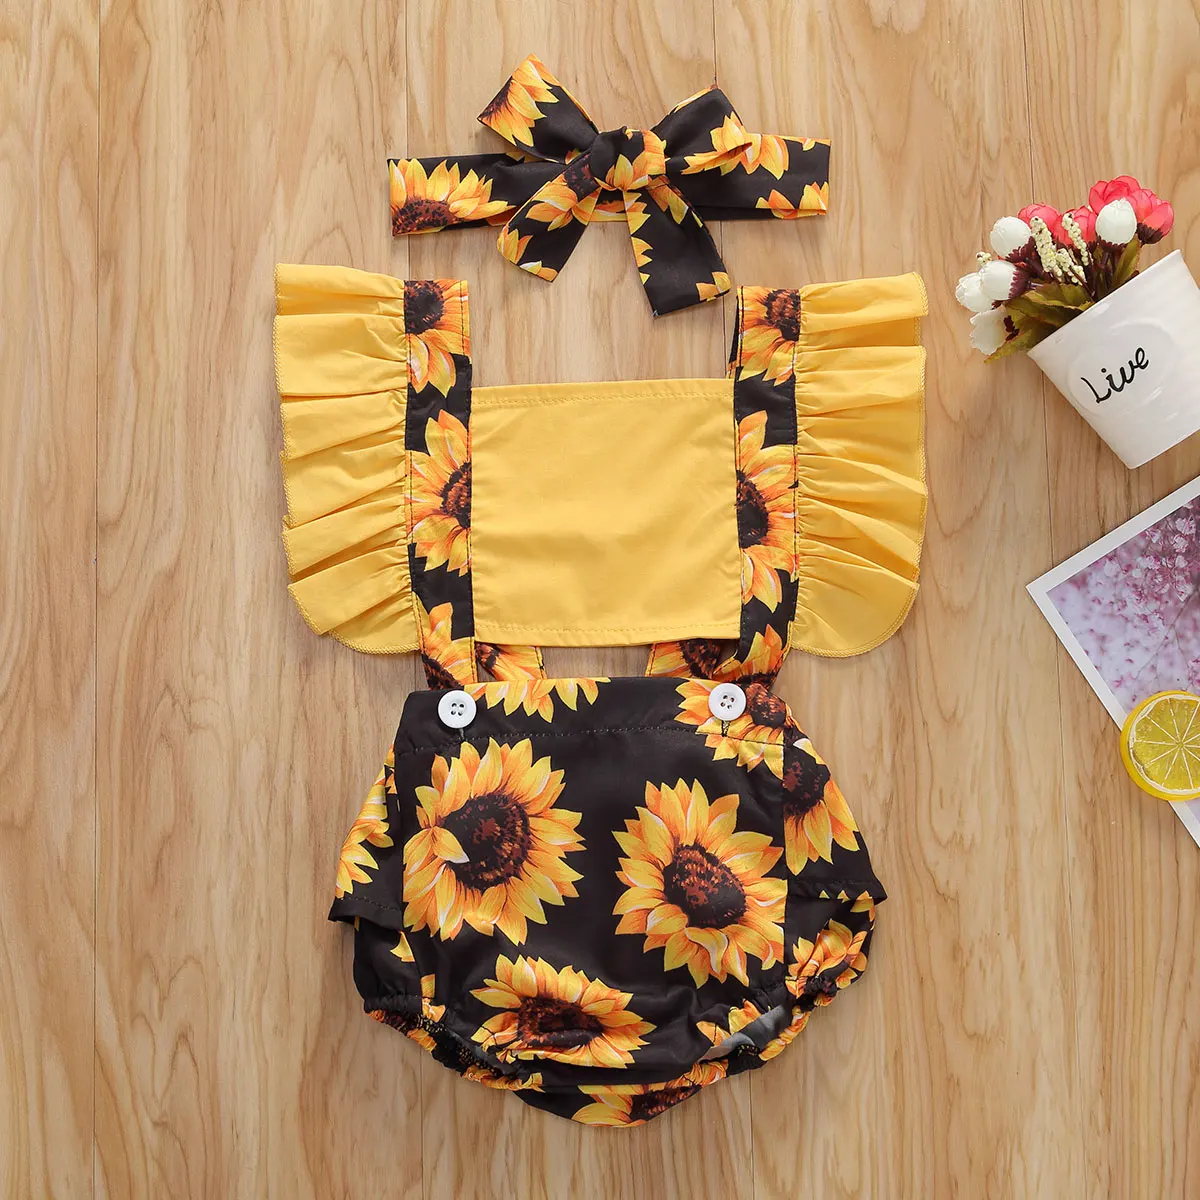 

Summer Baby Girls Clothes Sunflower Patchwork Ruffled Sleeve Jumpsuit Sleeveless Playsuit Headband Outfits 2Pcs Set for 0-24M